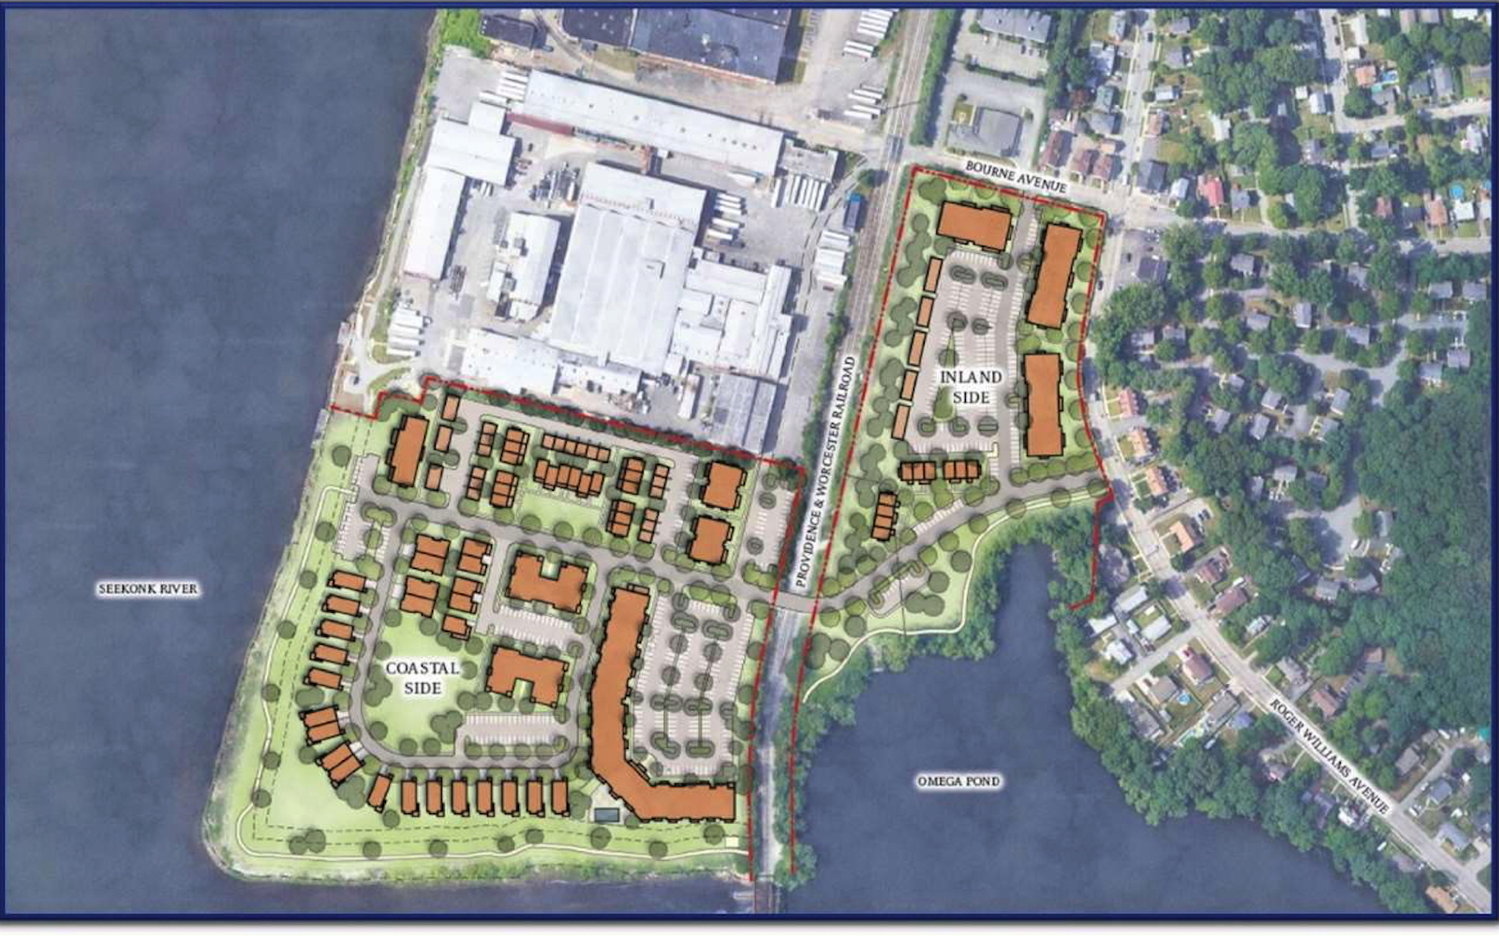 An architect's rendition of the "coastal" (left) and "inland/pond" (upper right) portions of the "East Point" housing development in Rumford.